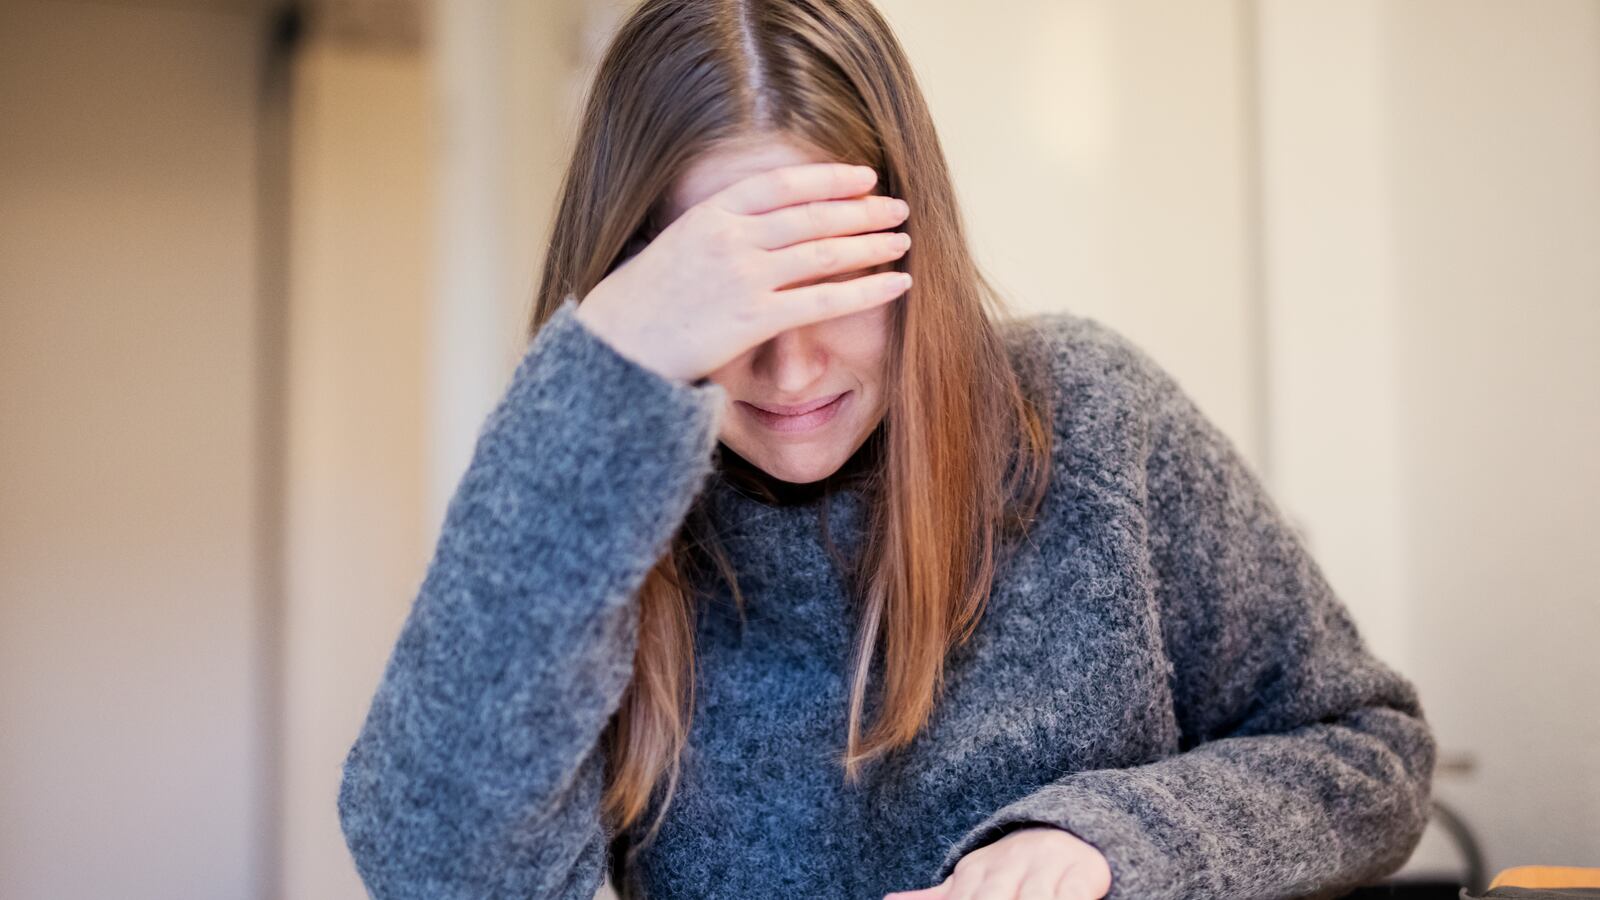 Distraught woman in a gray sweater